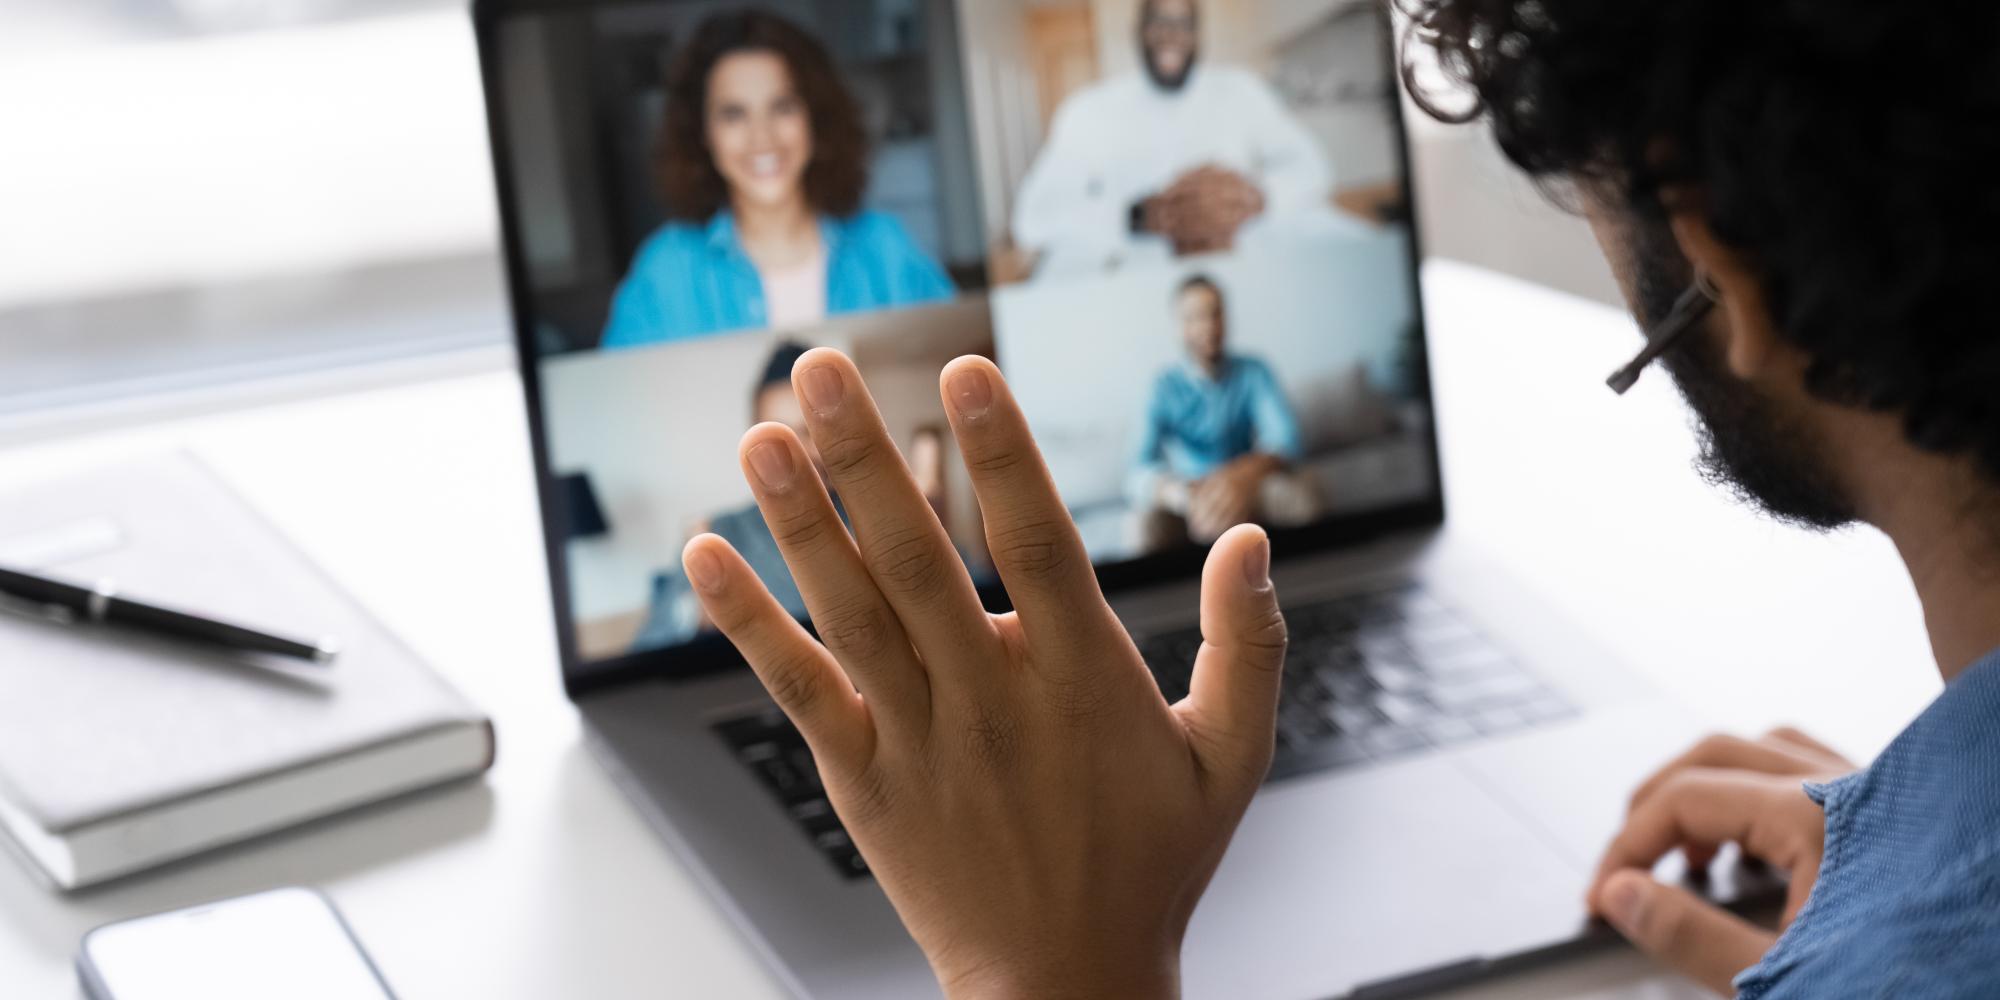 Stock photo of people working from home, waving to people on screen